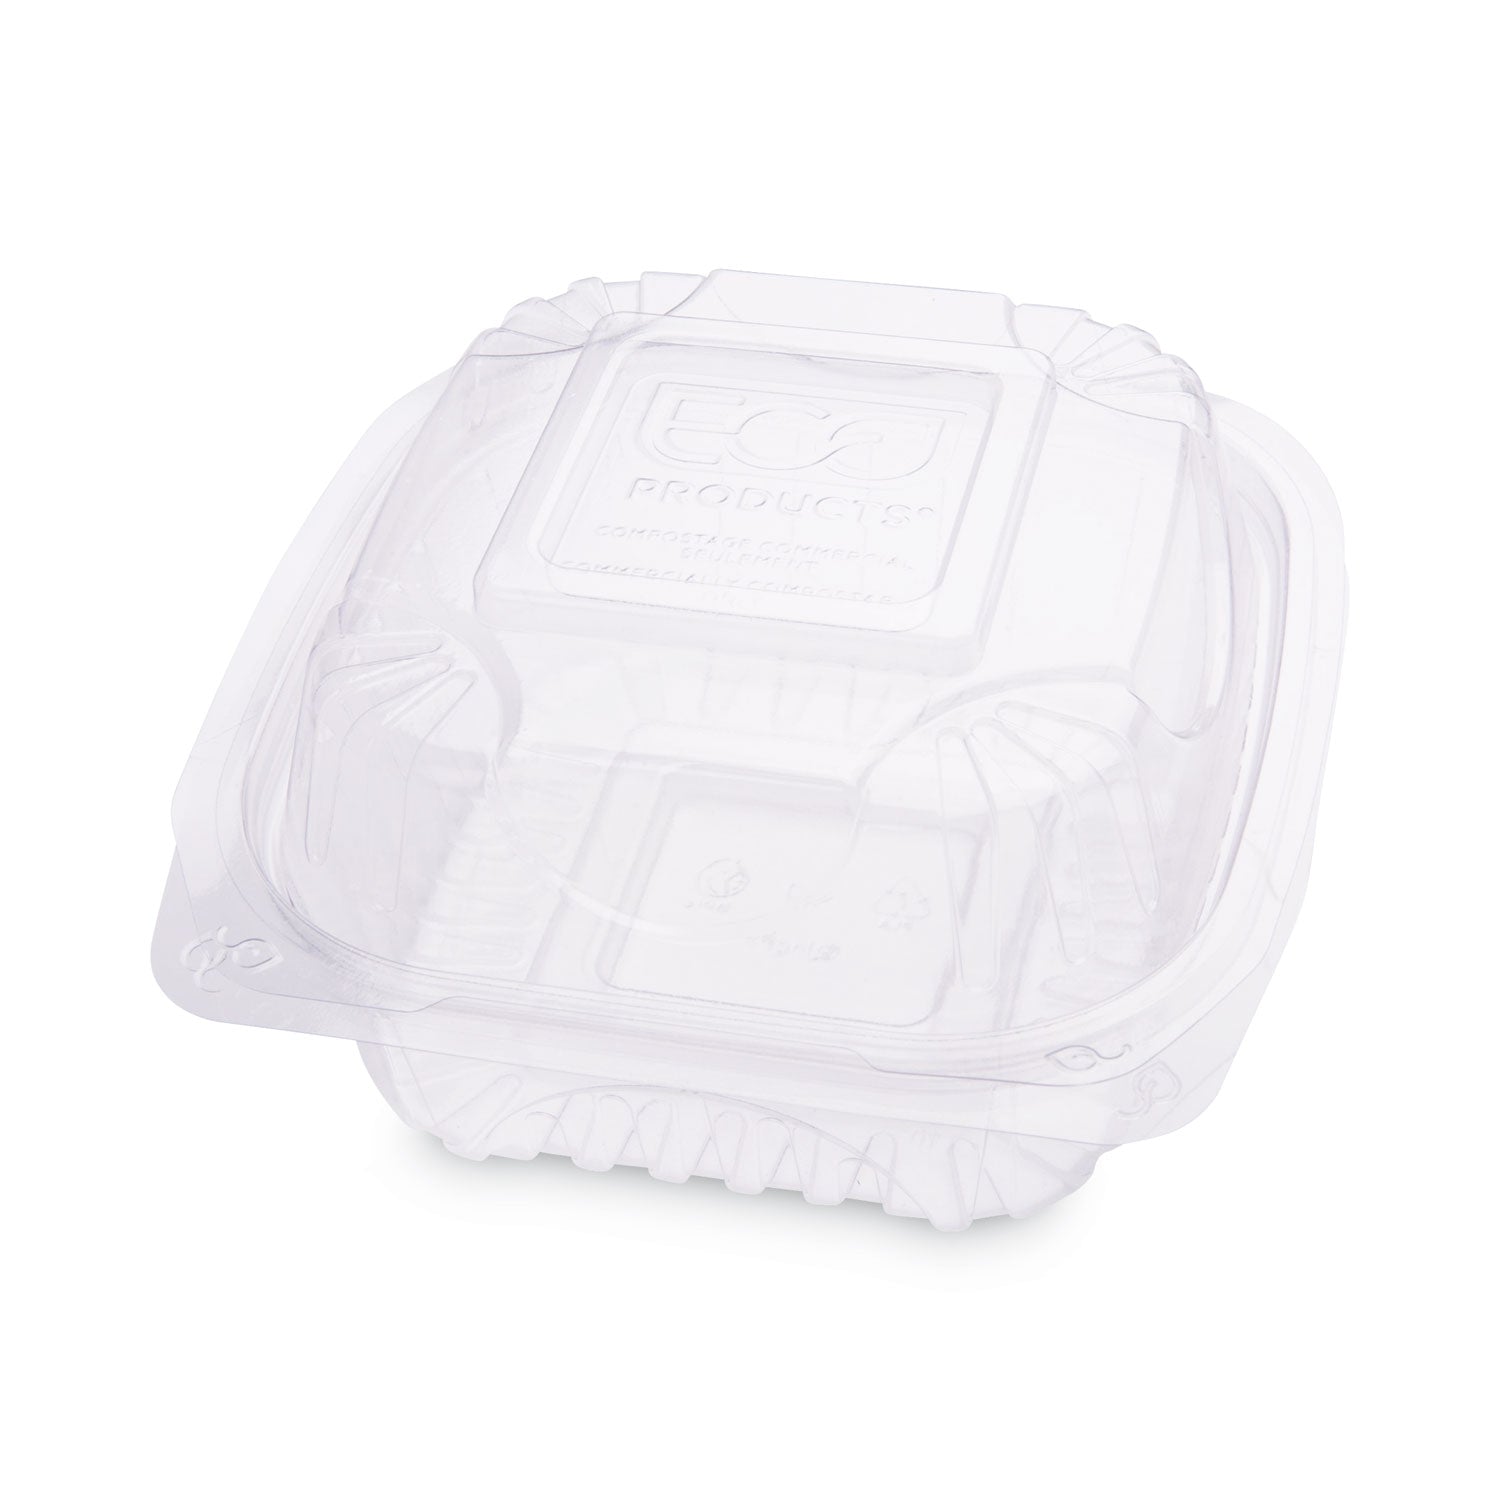 clear-clamshell-hinged-food-containers-6-x-6-x-3-plastic-80-pack-3-packs-carton_ecoeplc6 - 1